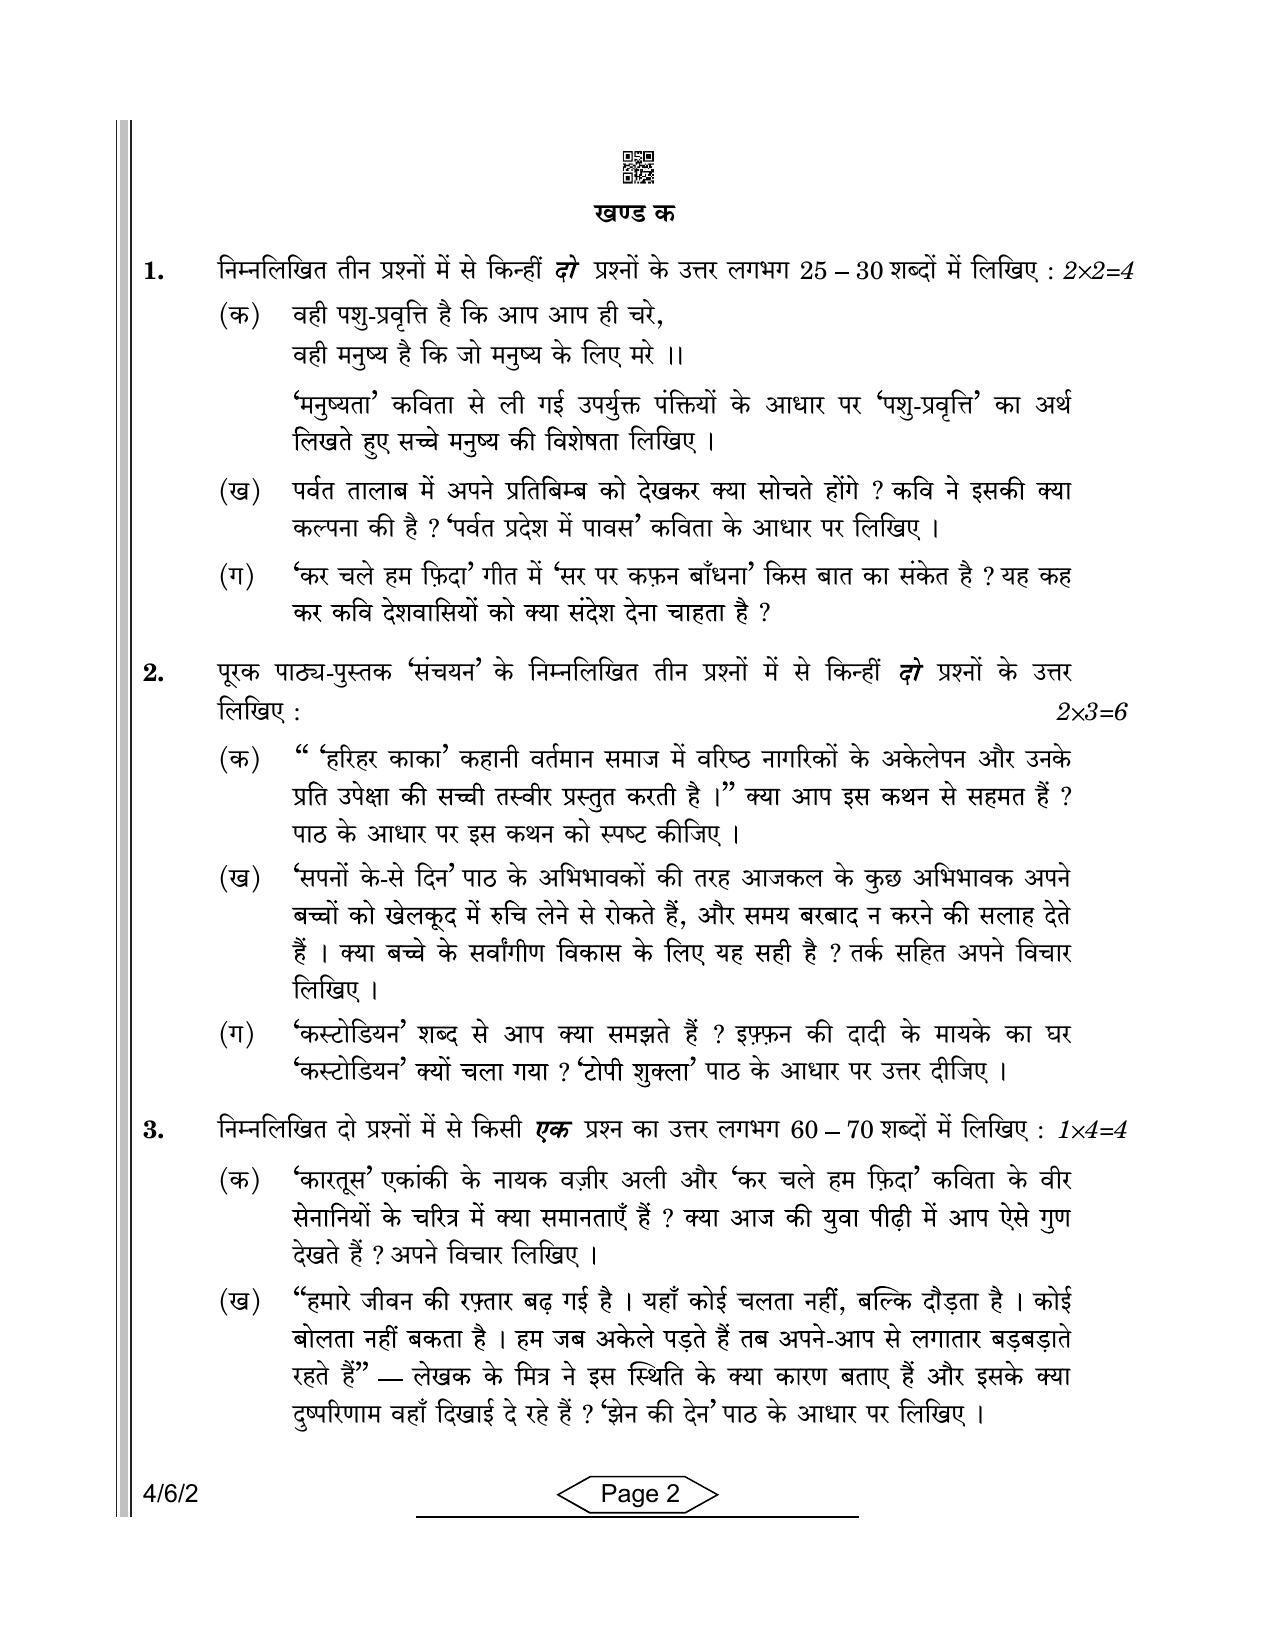 CBSE Class 10 4-6-2 Hindi-B 2022 Compartment Question Paper - Page 2